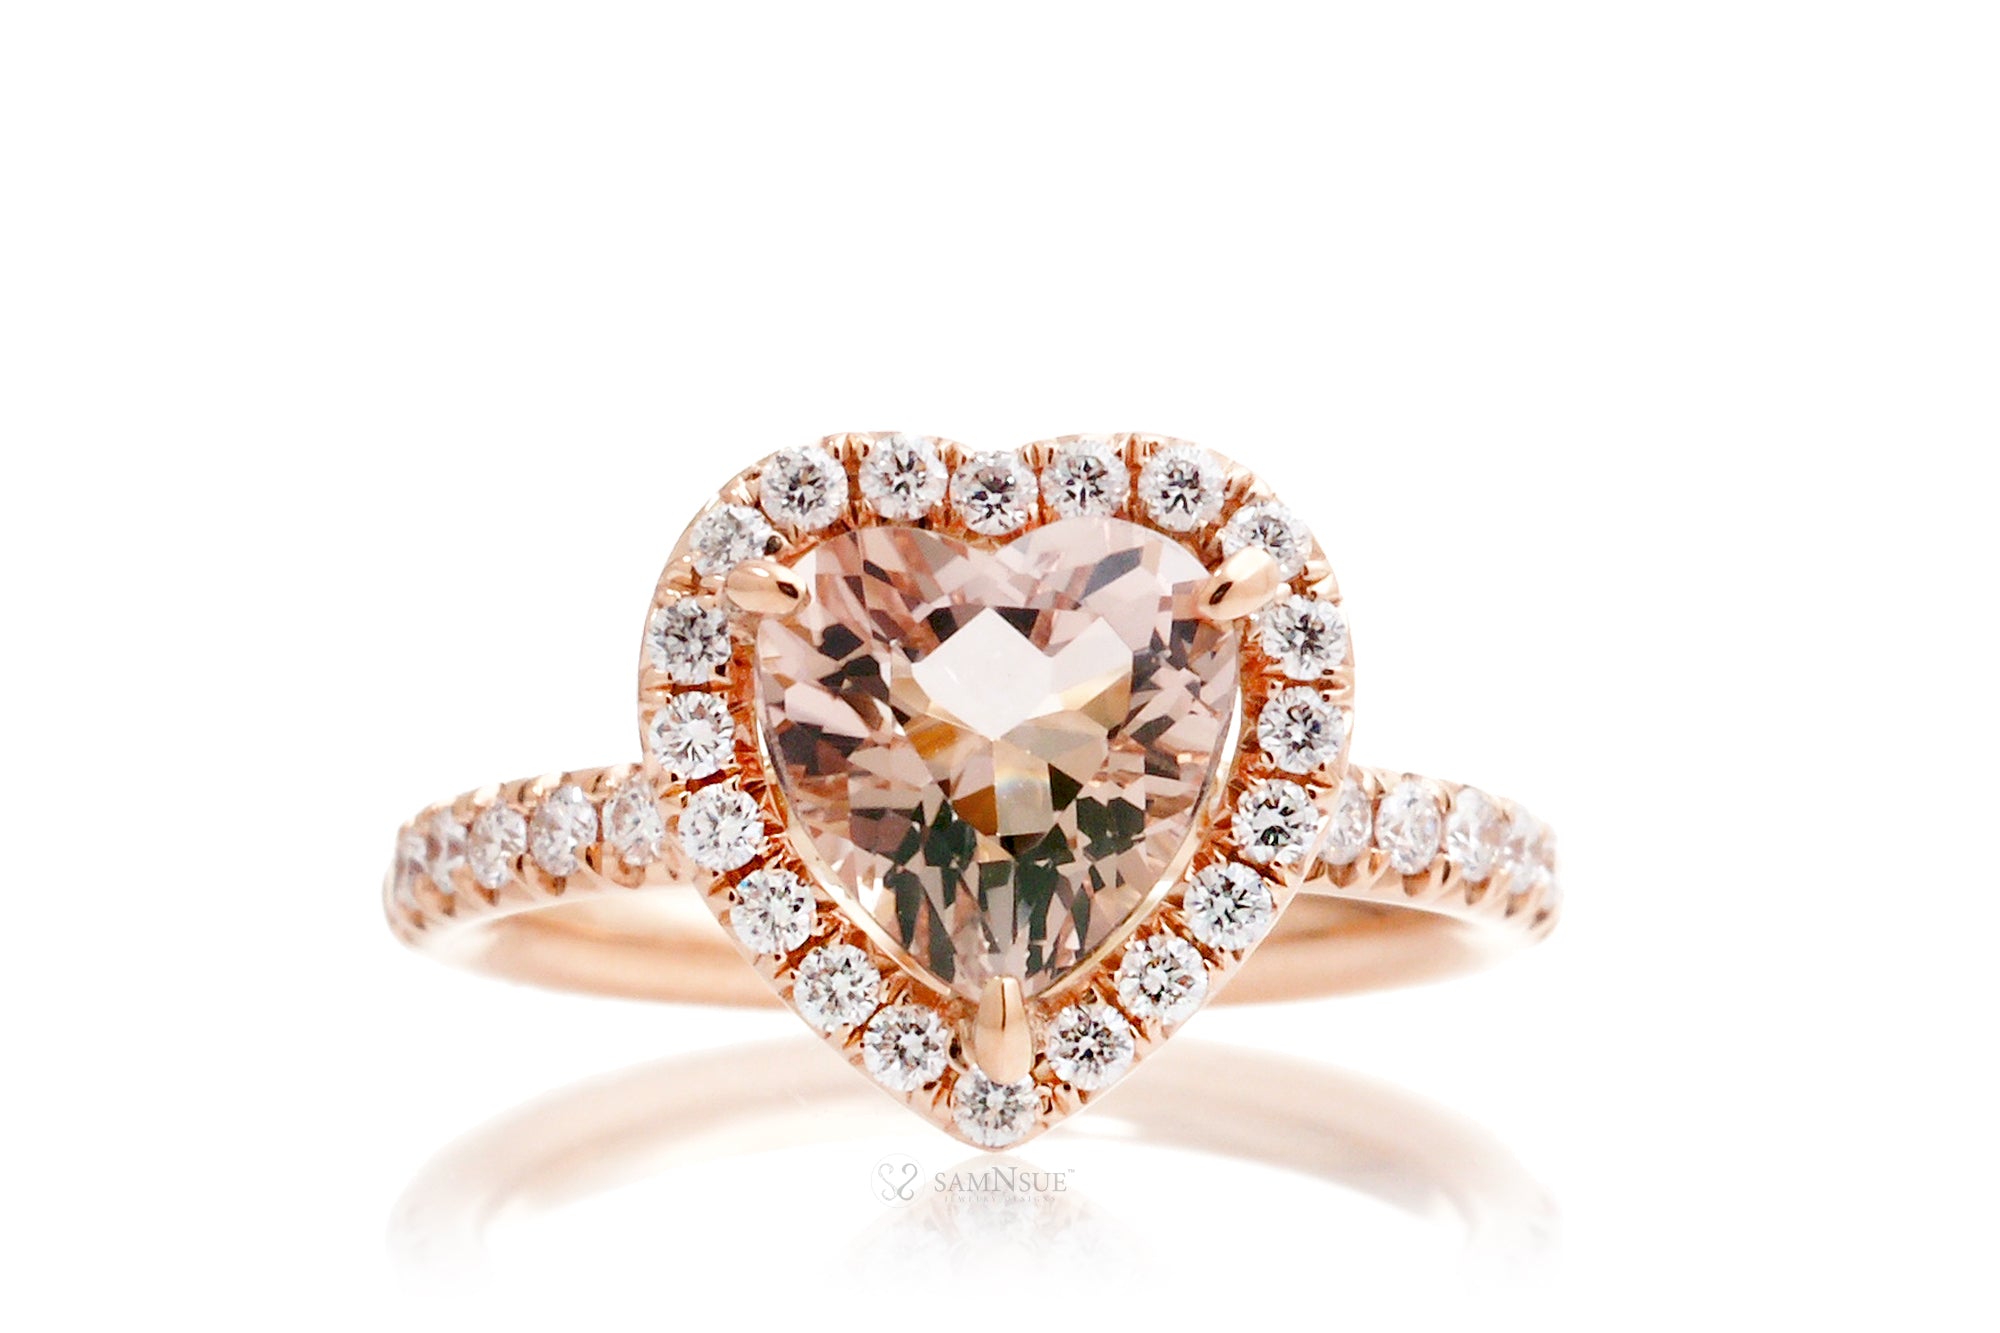 The Drenched Heart Morganite Ring